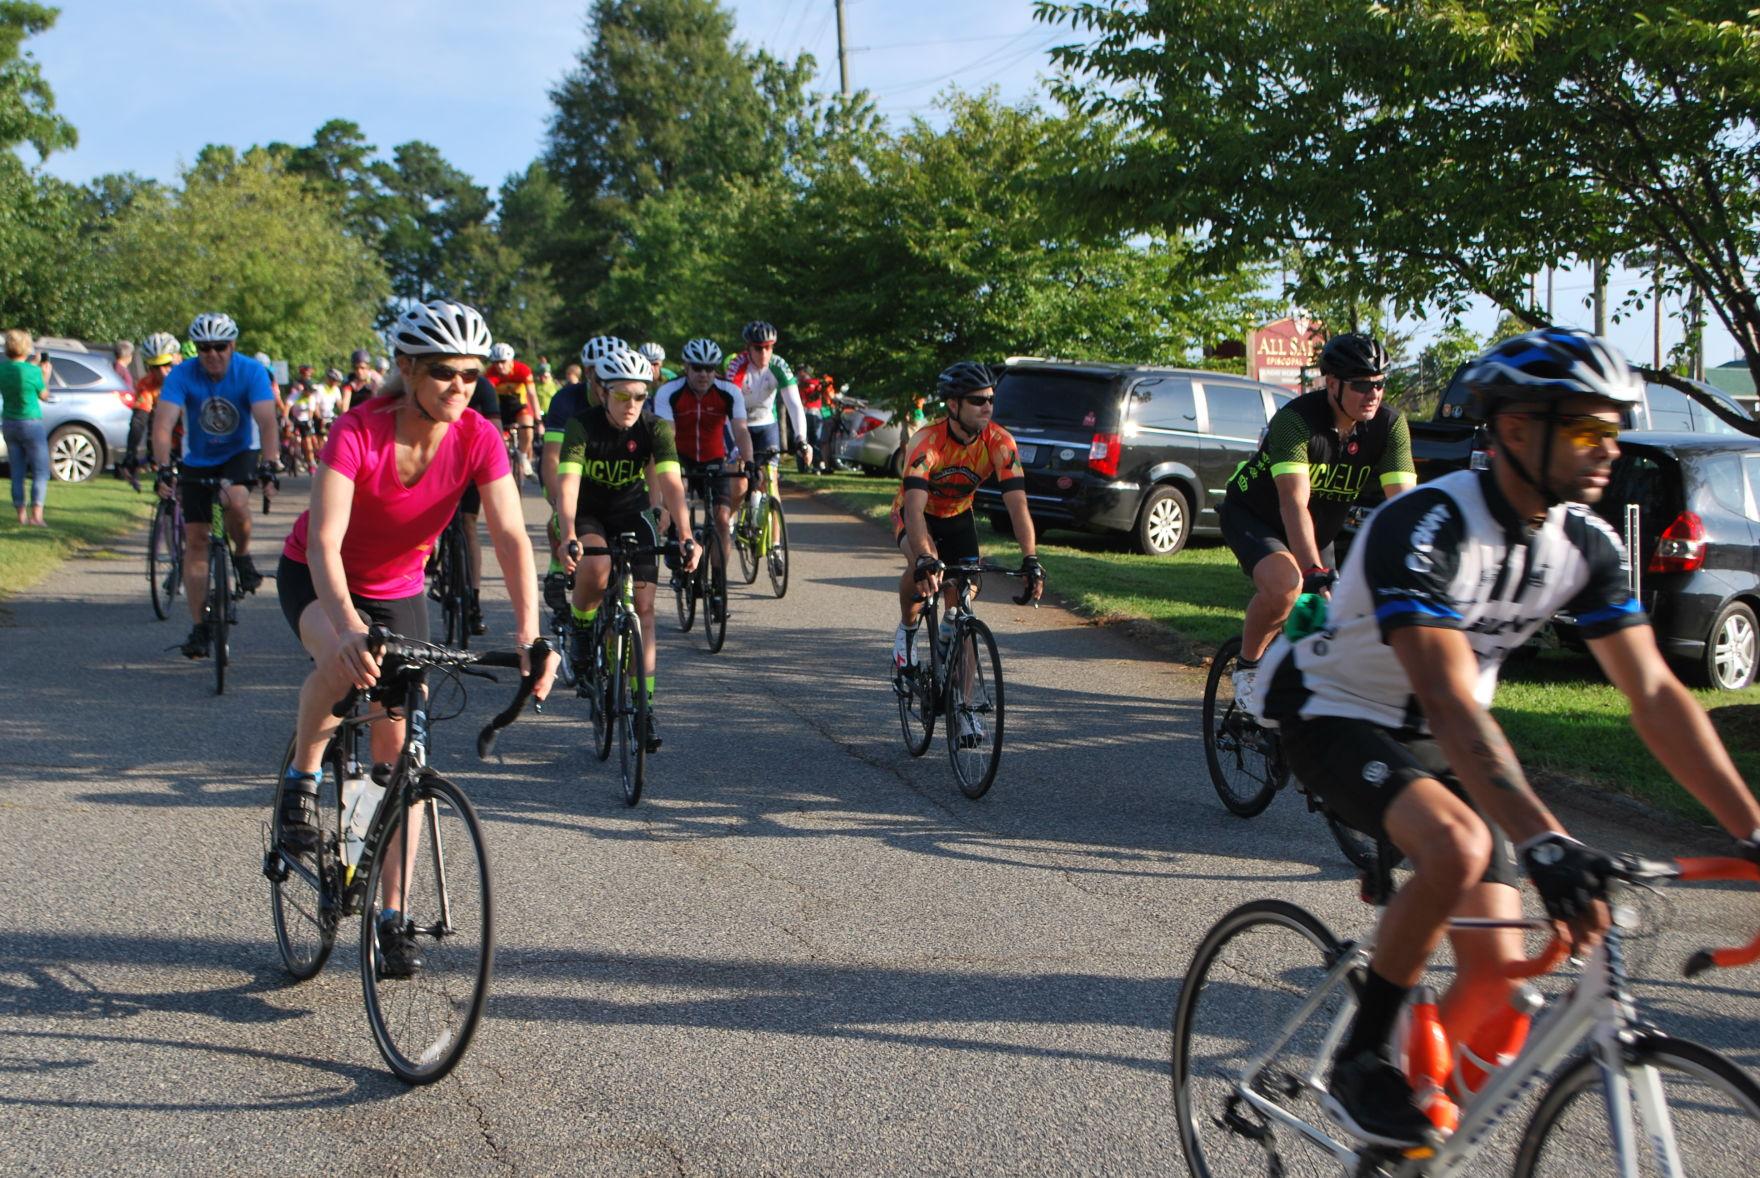 Tour de Saints bicycle ride takes aim at helping those in need Latest